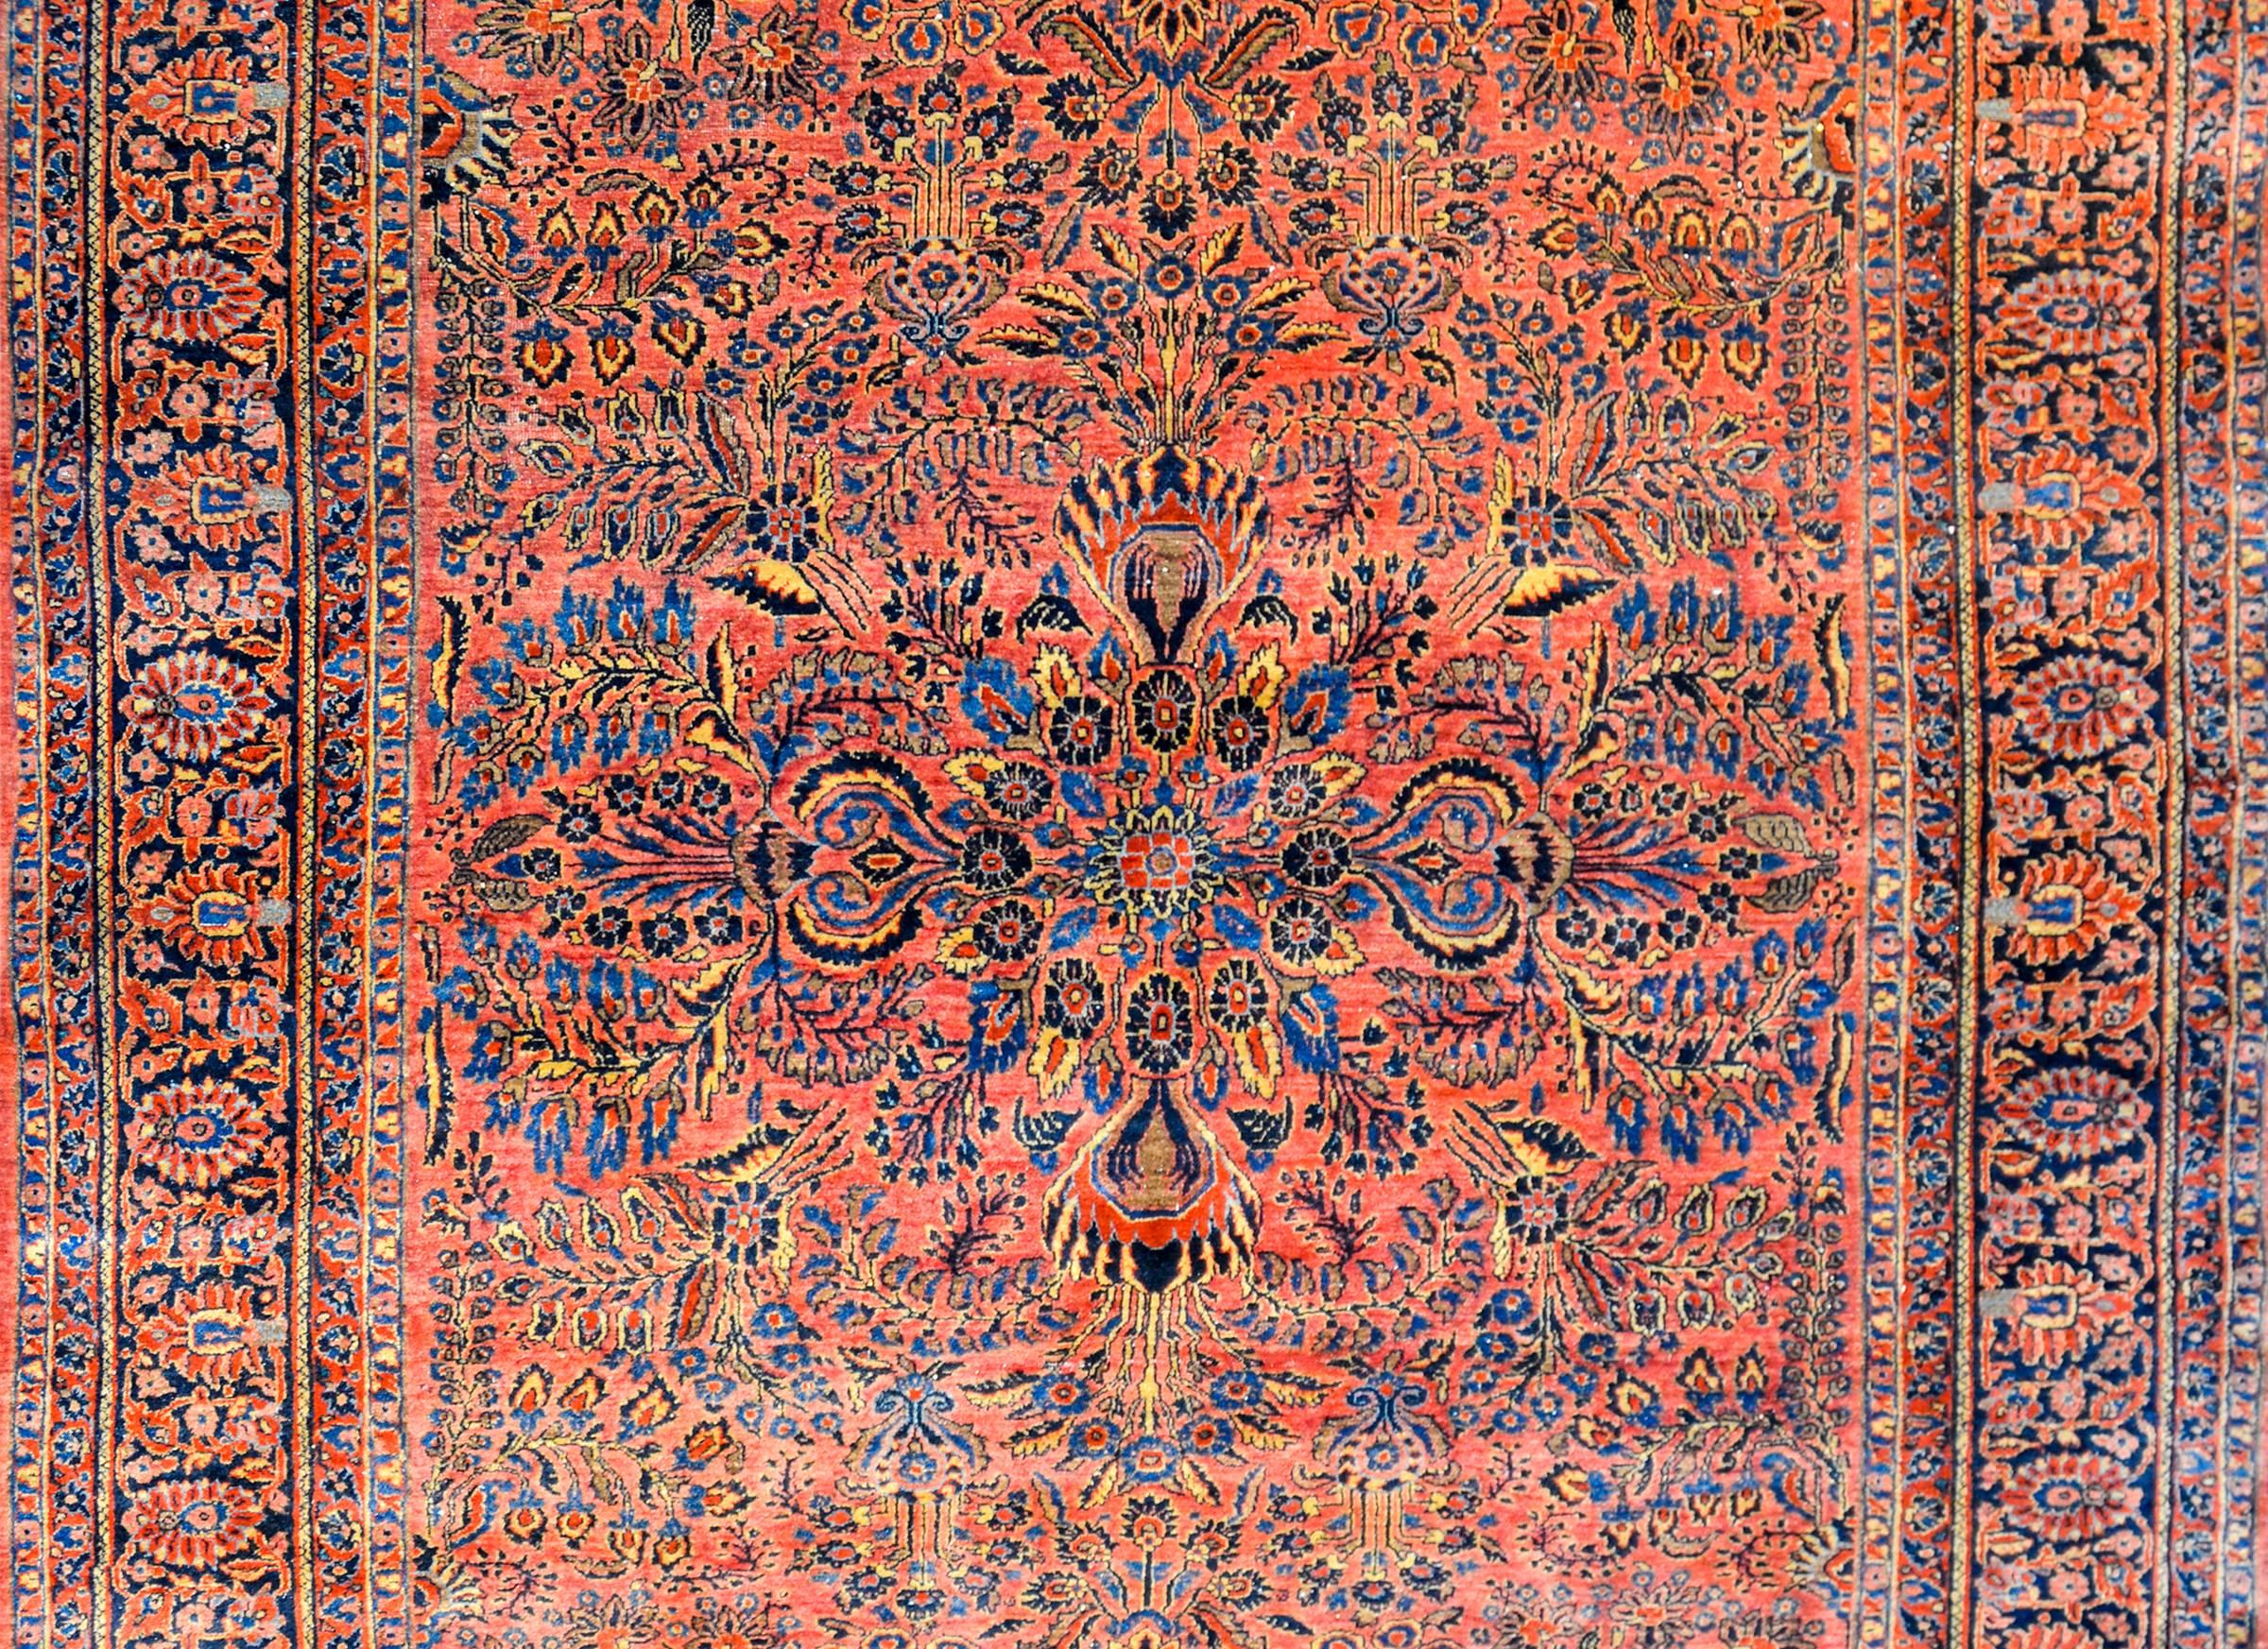 A beautiful early 20th century Persian Sarouk rug with a fantastic mirrored floral and vine pattern, expertly rendered, in light and dark indigo, salmon, gold, on a bold crimson background. The border is wide, with a wide stripe containing a floral